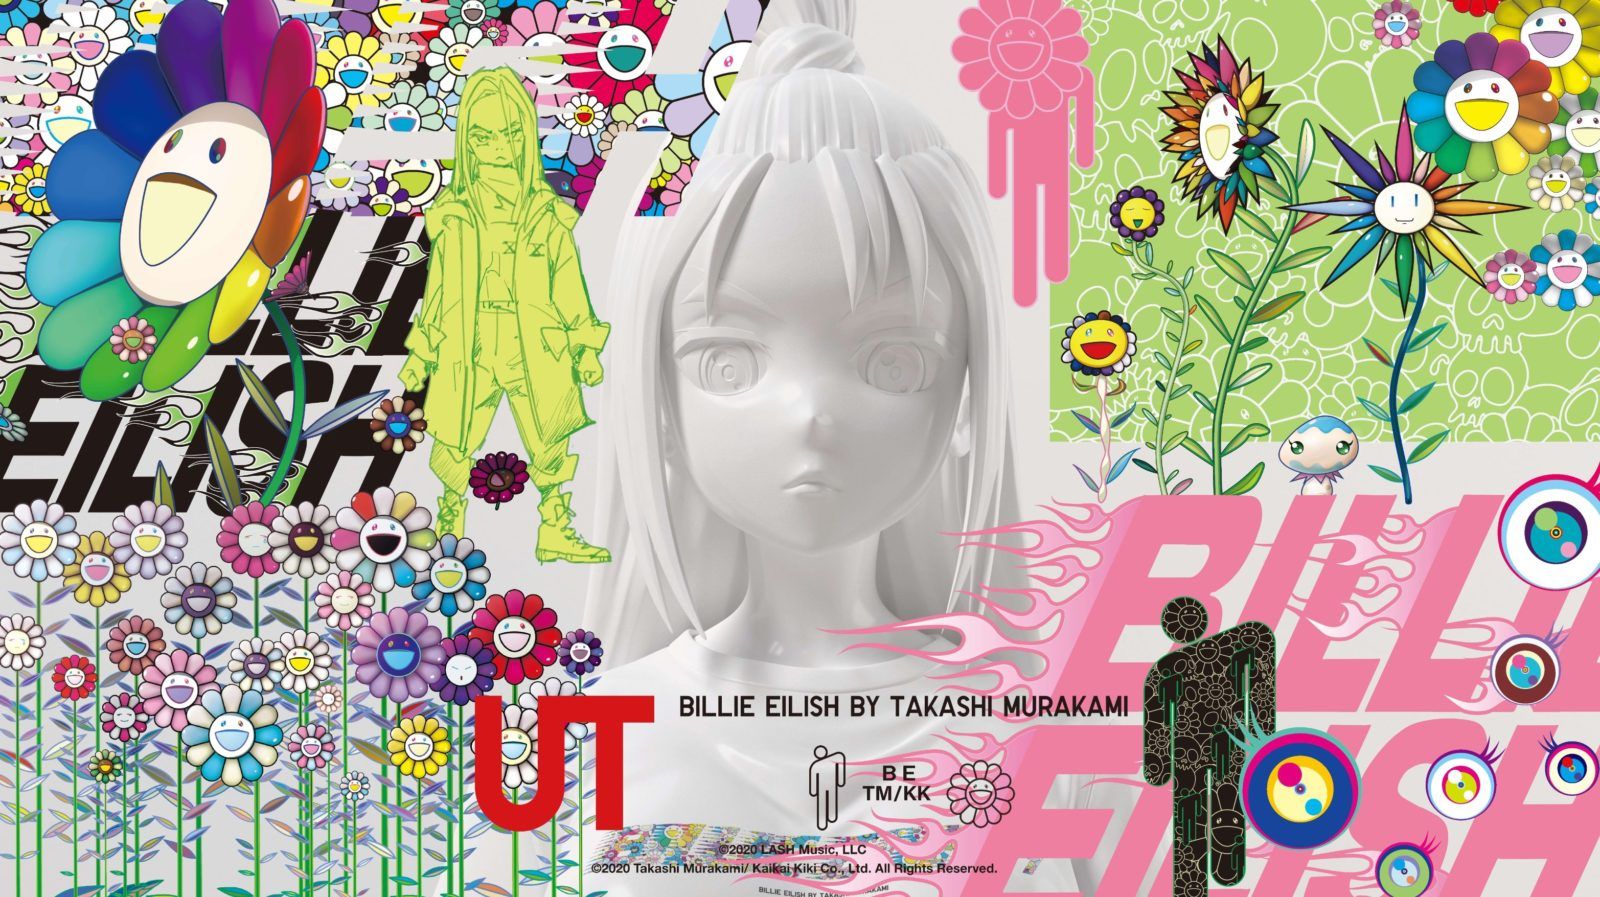 What to expect when the Billie Eilish and Takashi Murakami Uniqlo collab drops